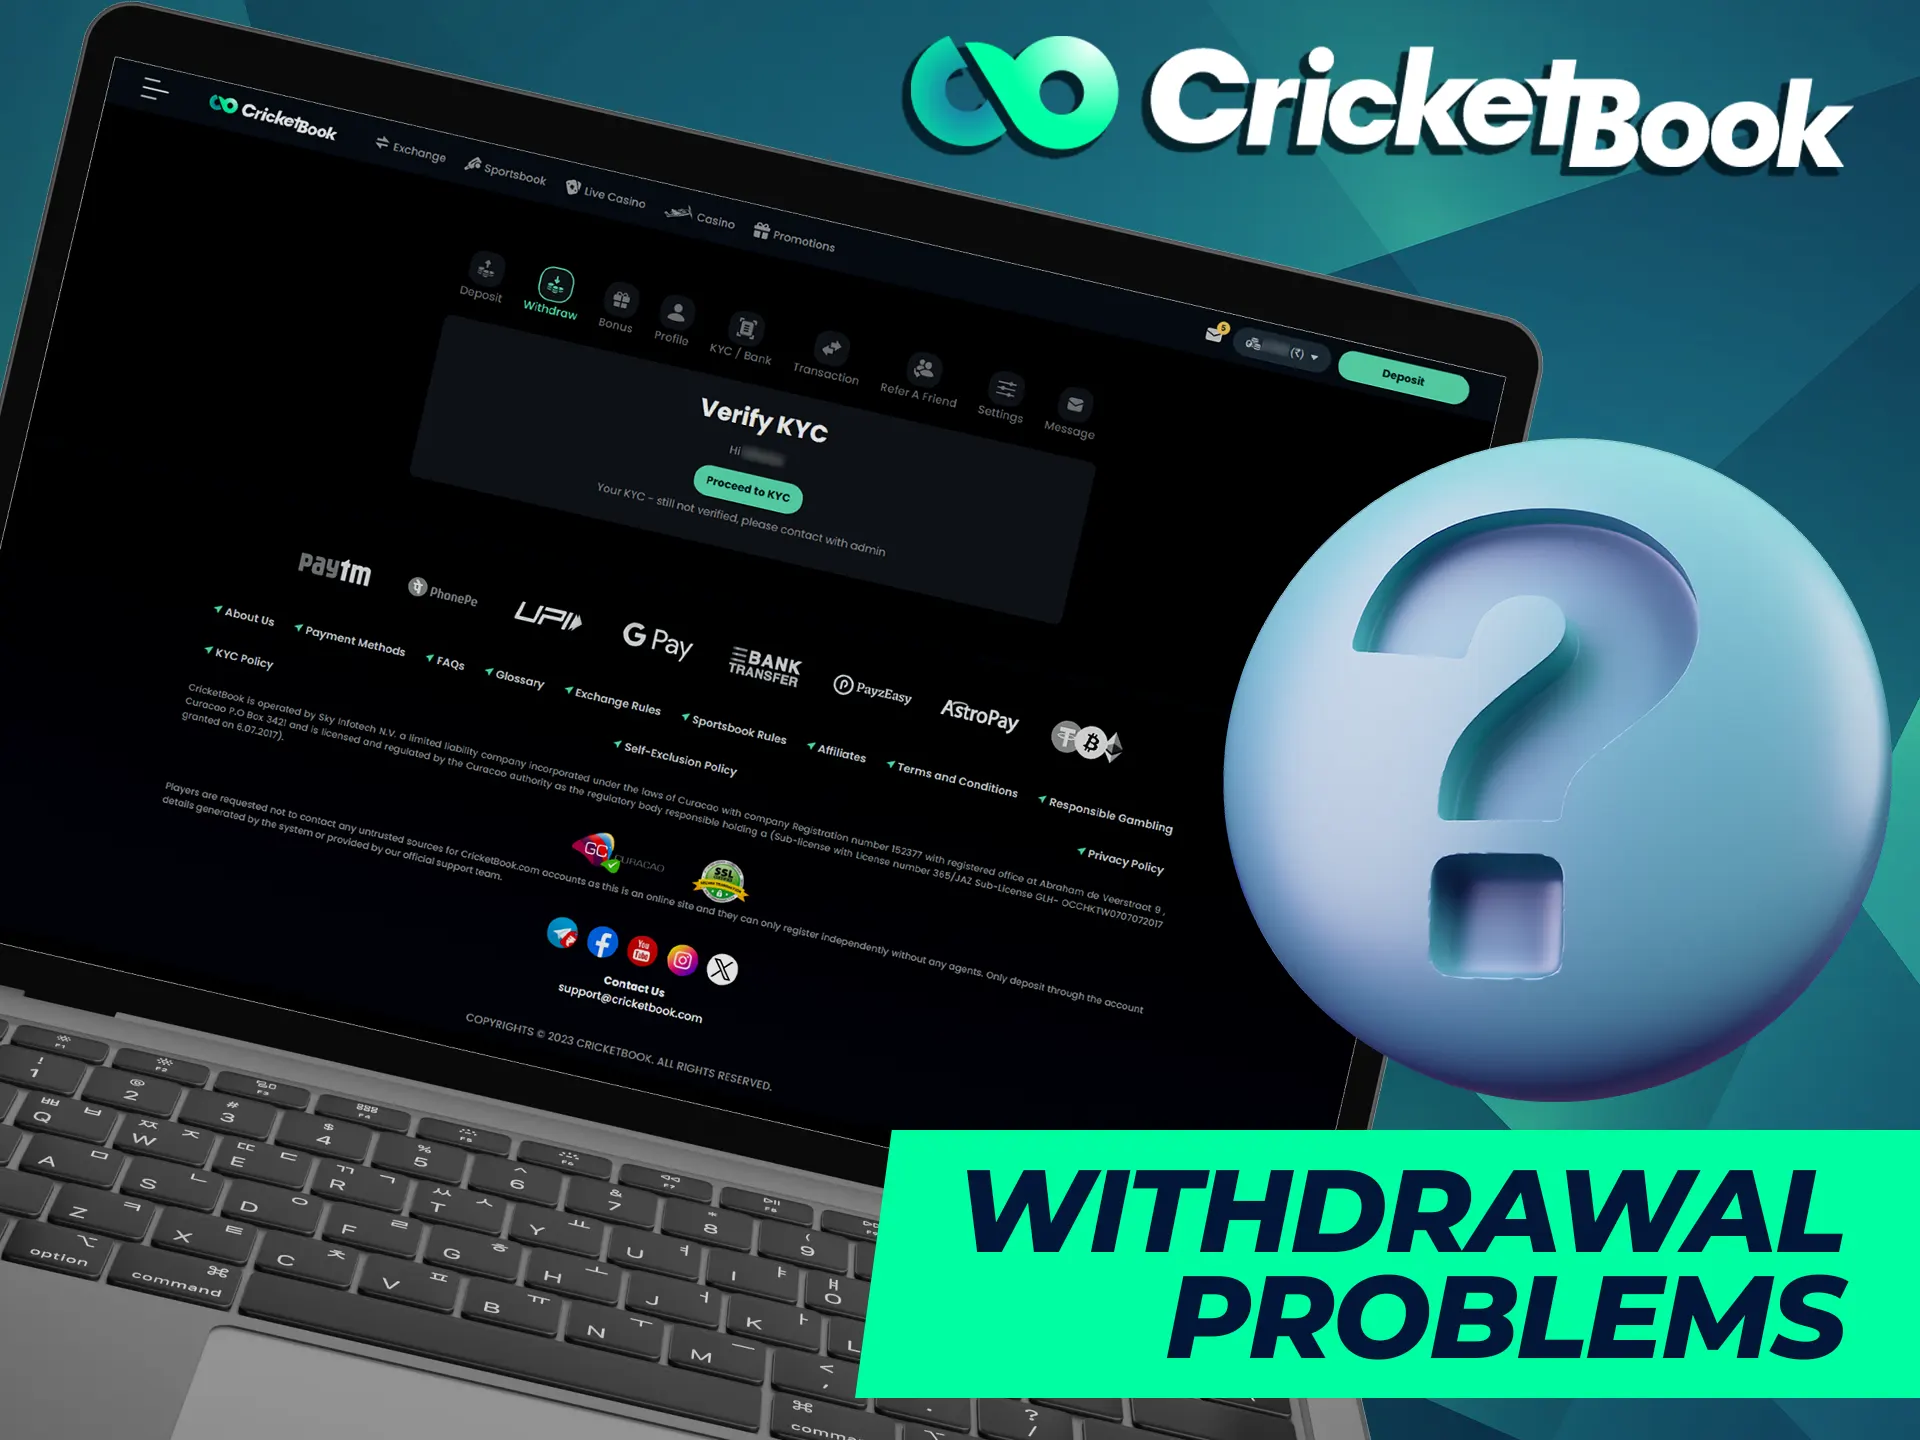 If you have a problem with your withdrawal at CricketBook, please contact our support team.